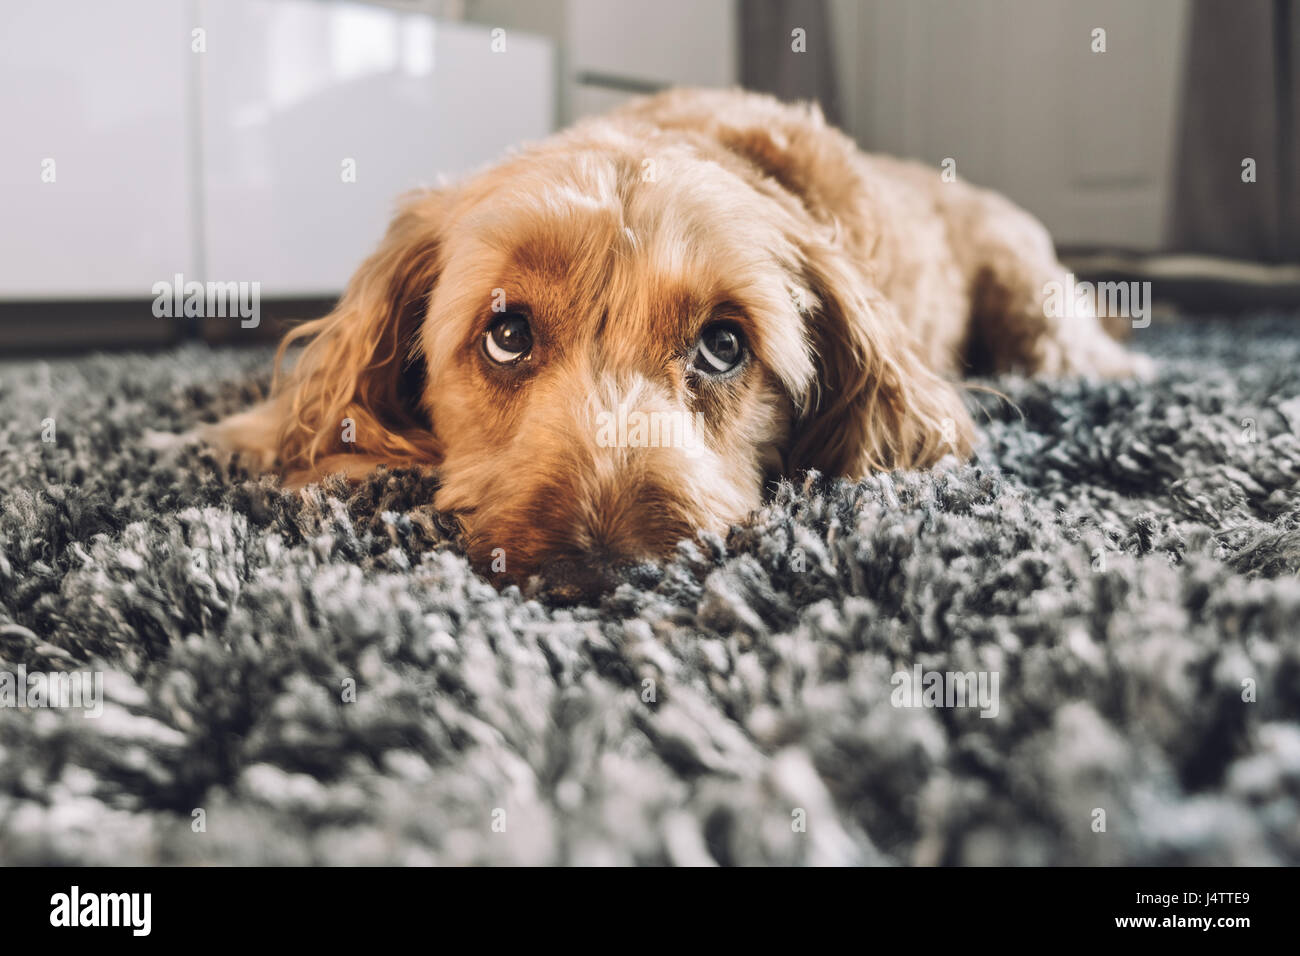 Cute dog giving his best puppy dog eyes Stock Photo